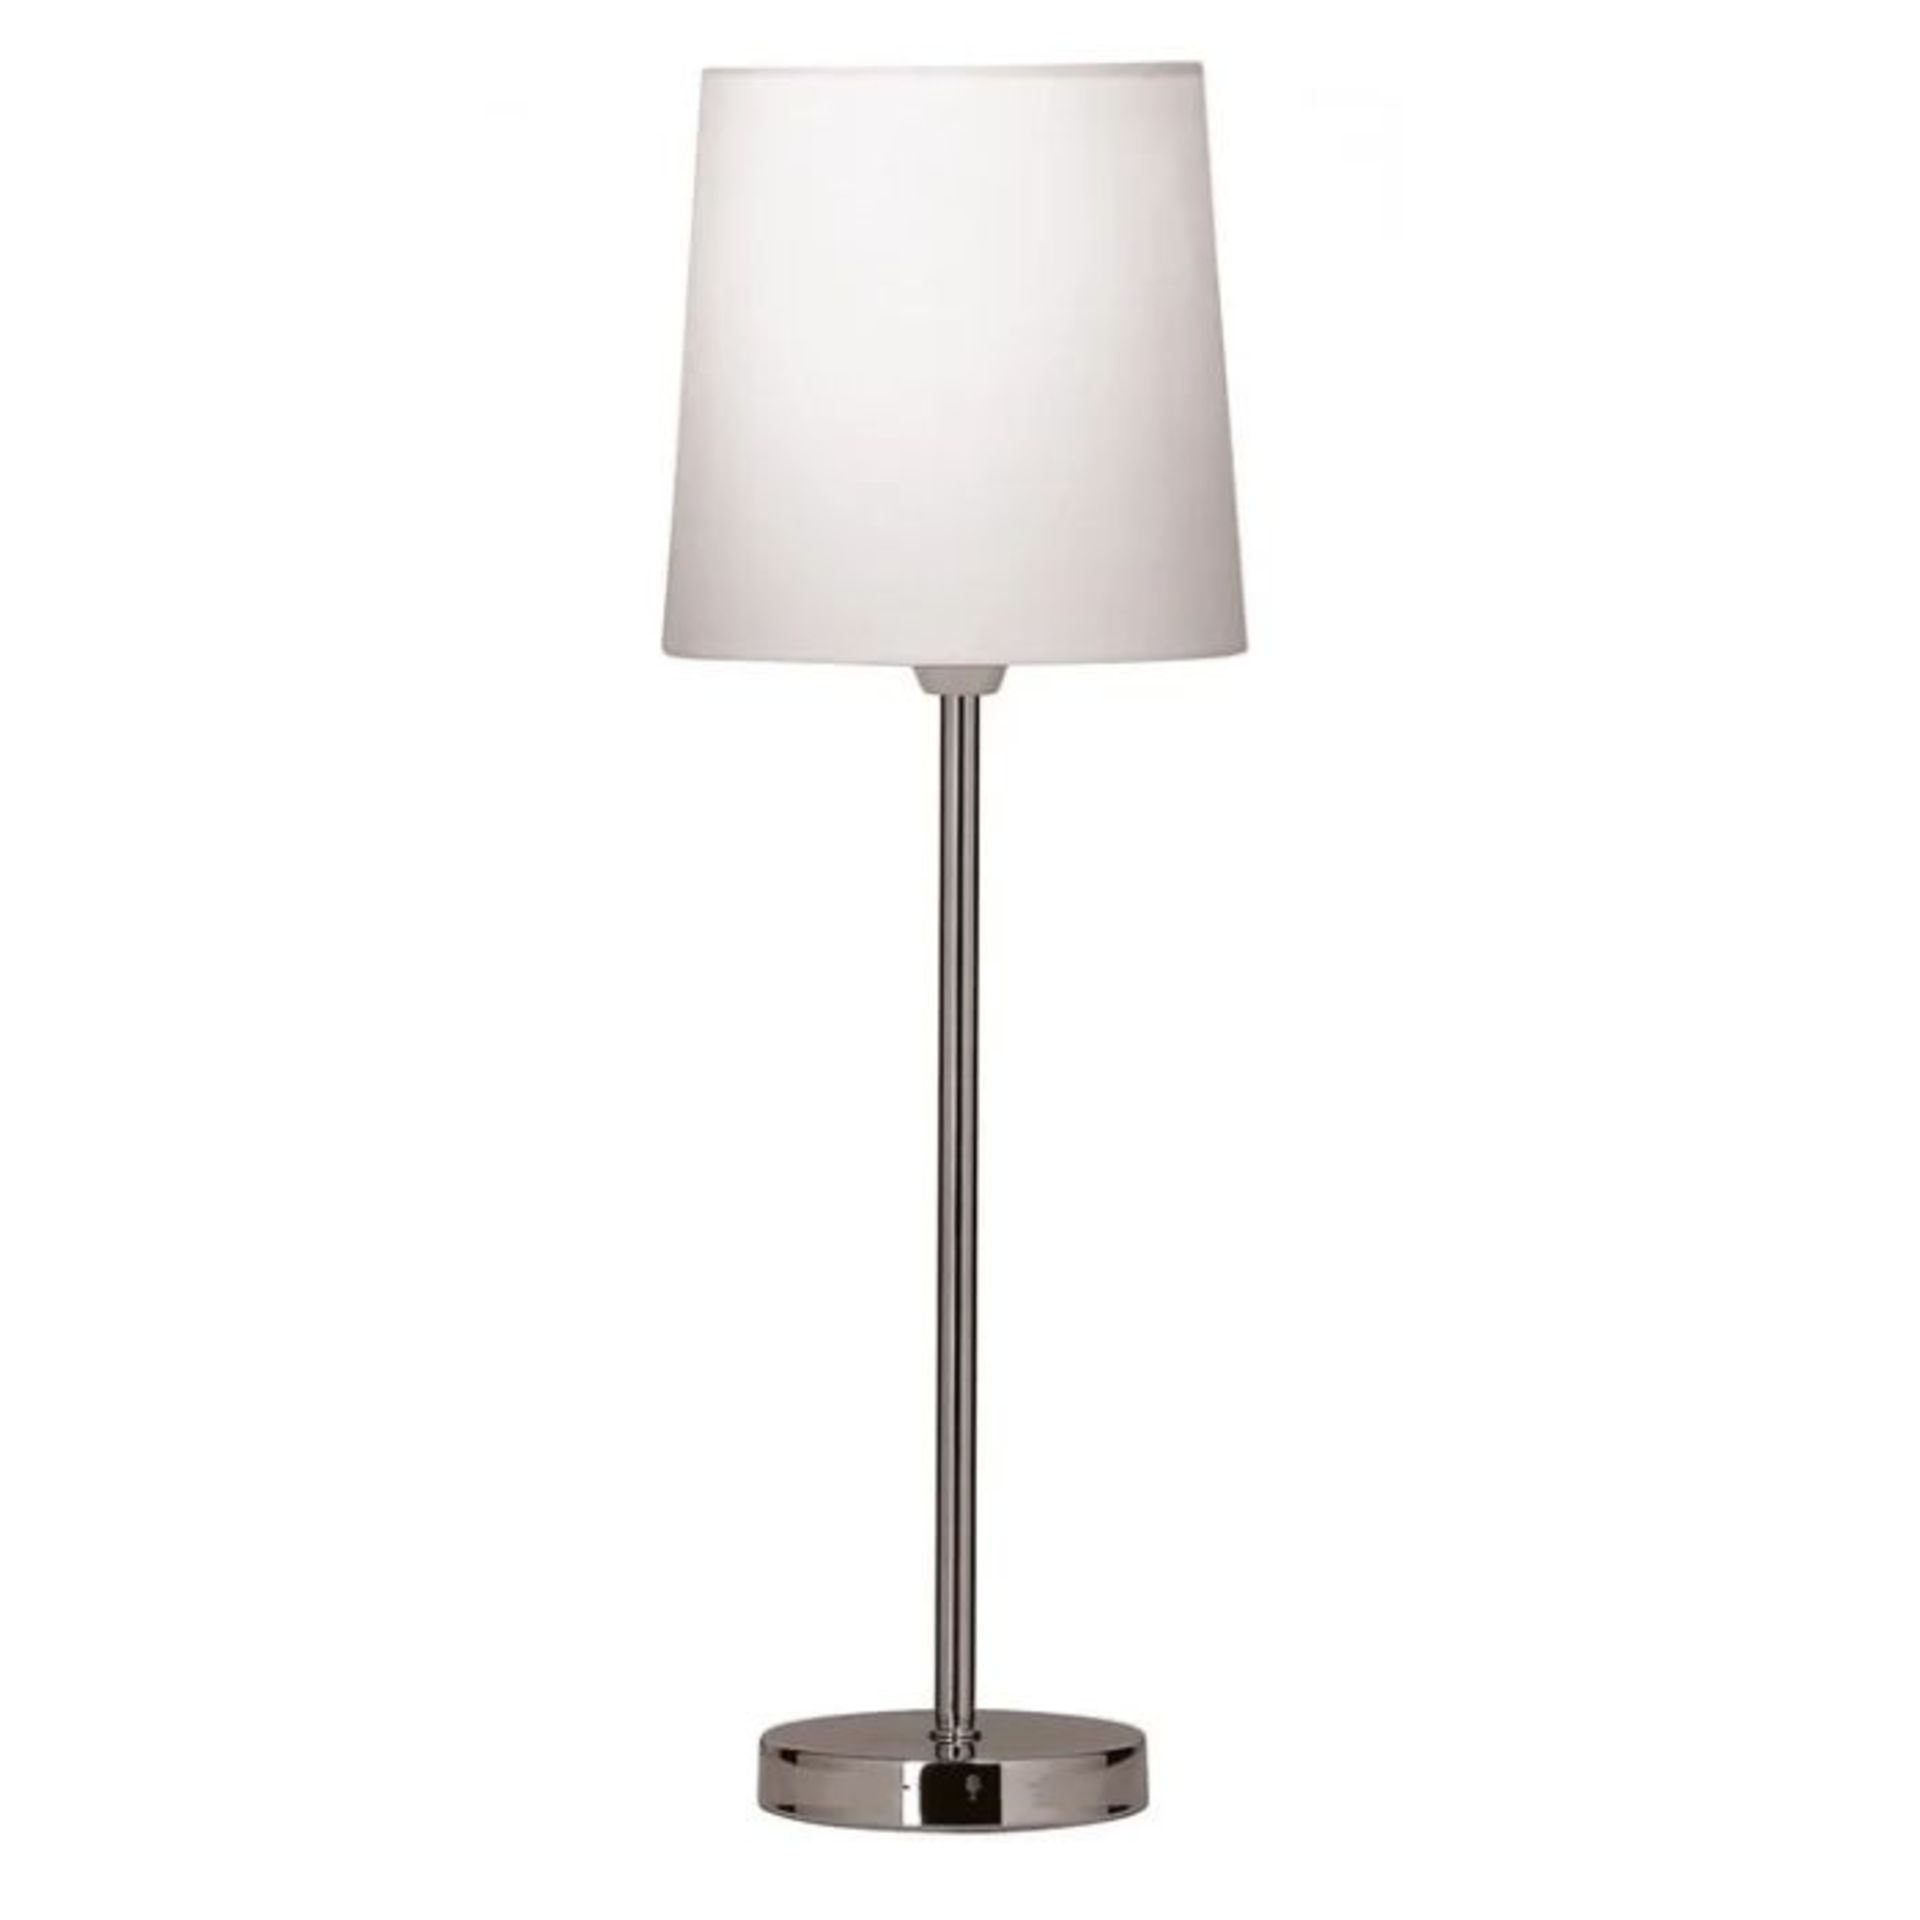 Zipcode Design, Wirila Metallic Table Lamp Shade (WHITE) (16.5cm) (SHADE ONLY NO BASE INCLUDED) (TLI